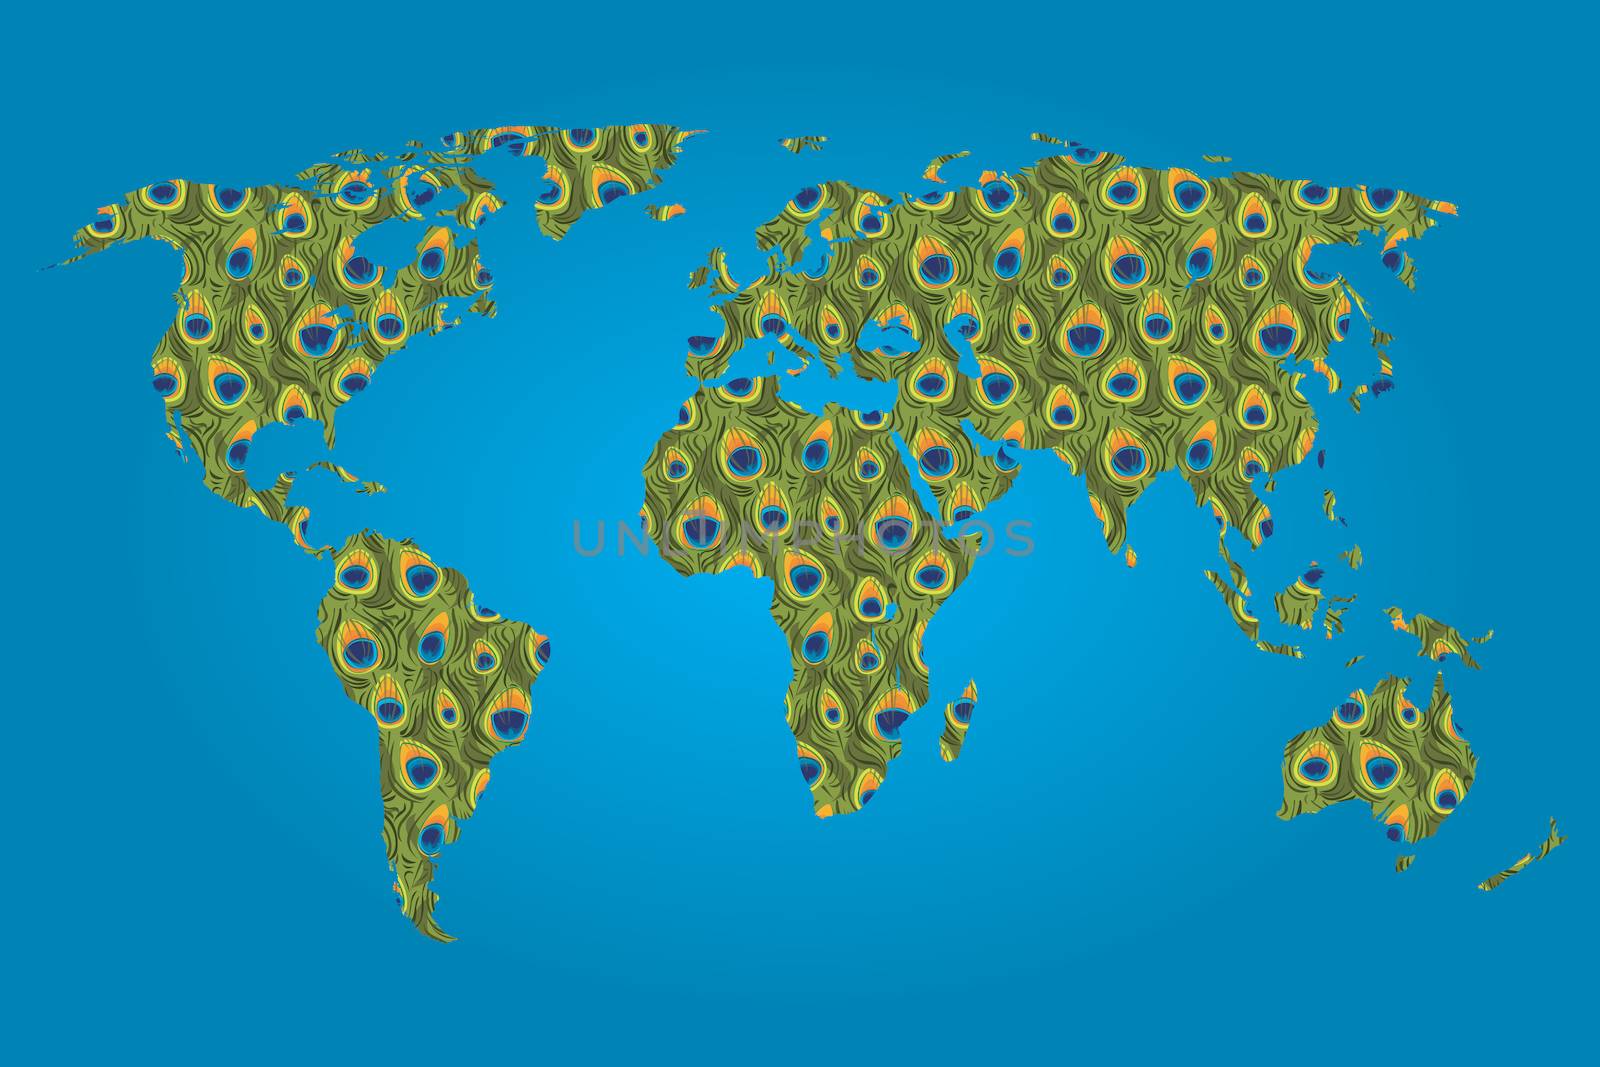 Map of the world filled with a Peacock pattern